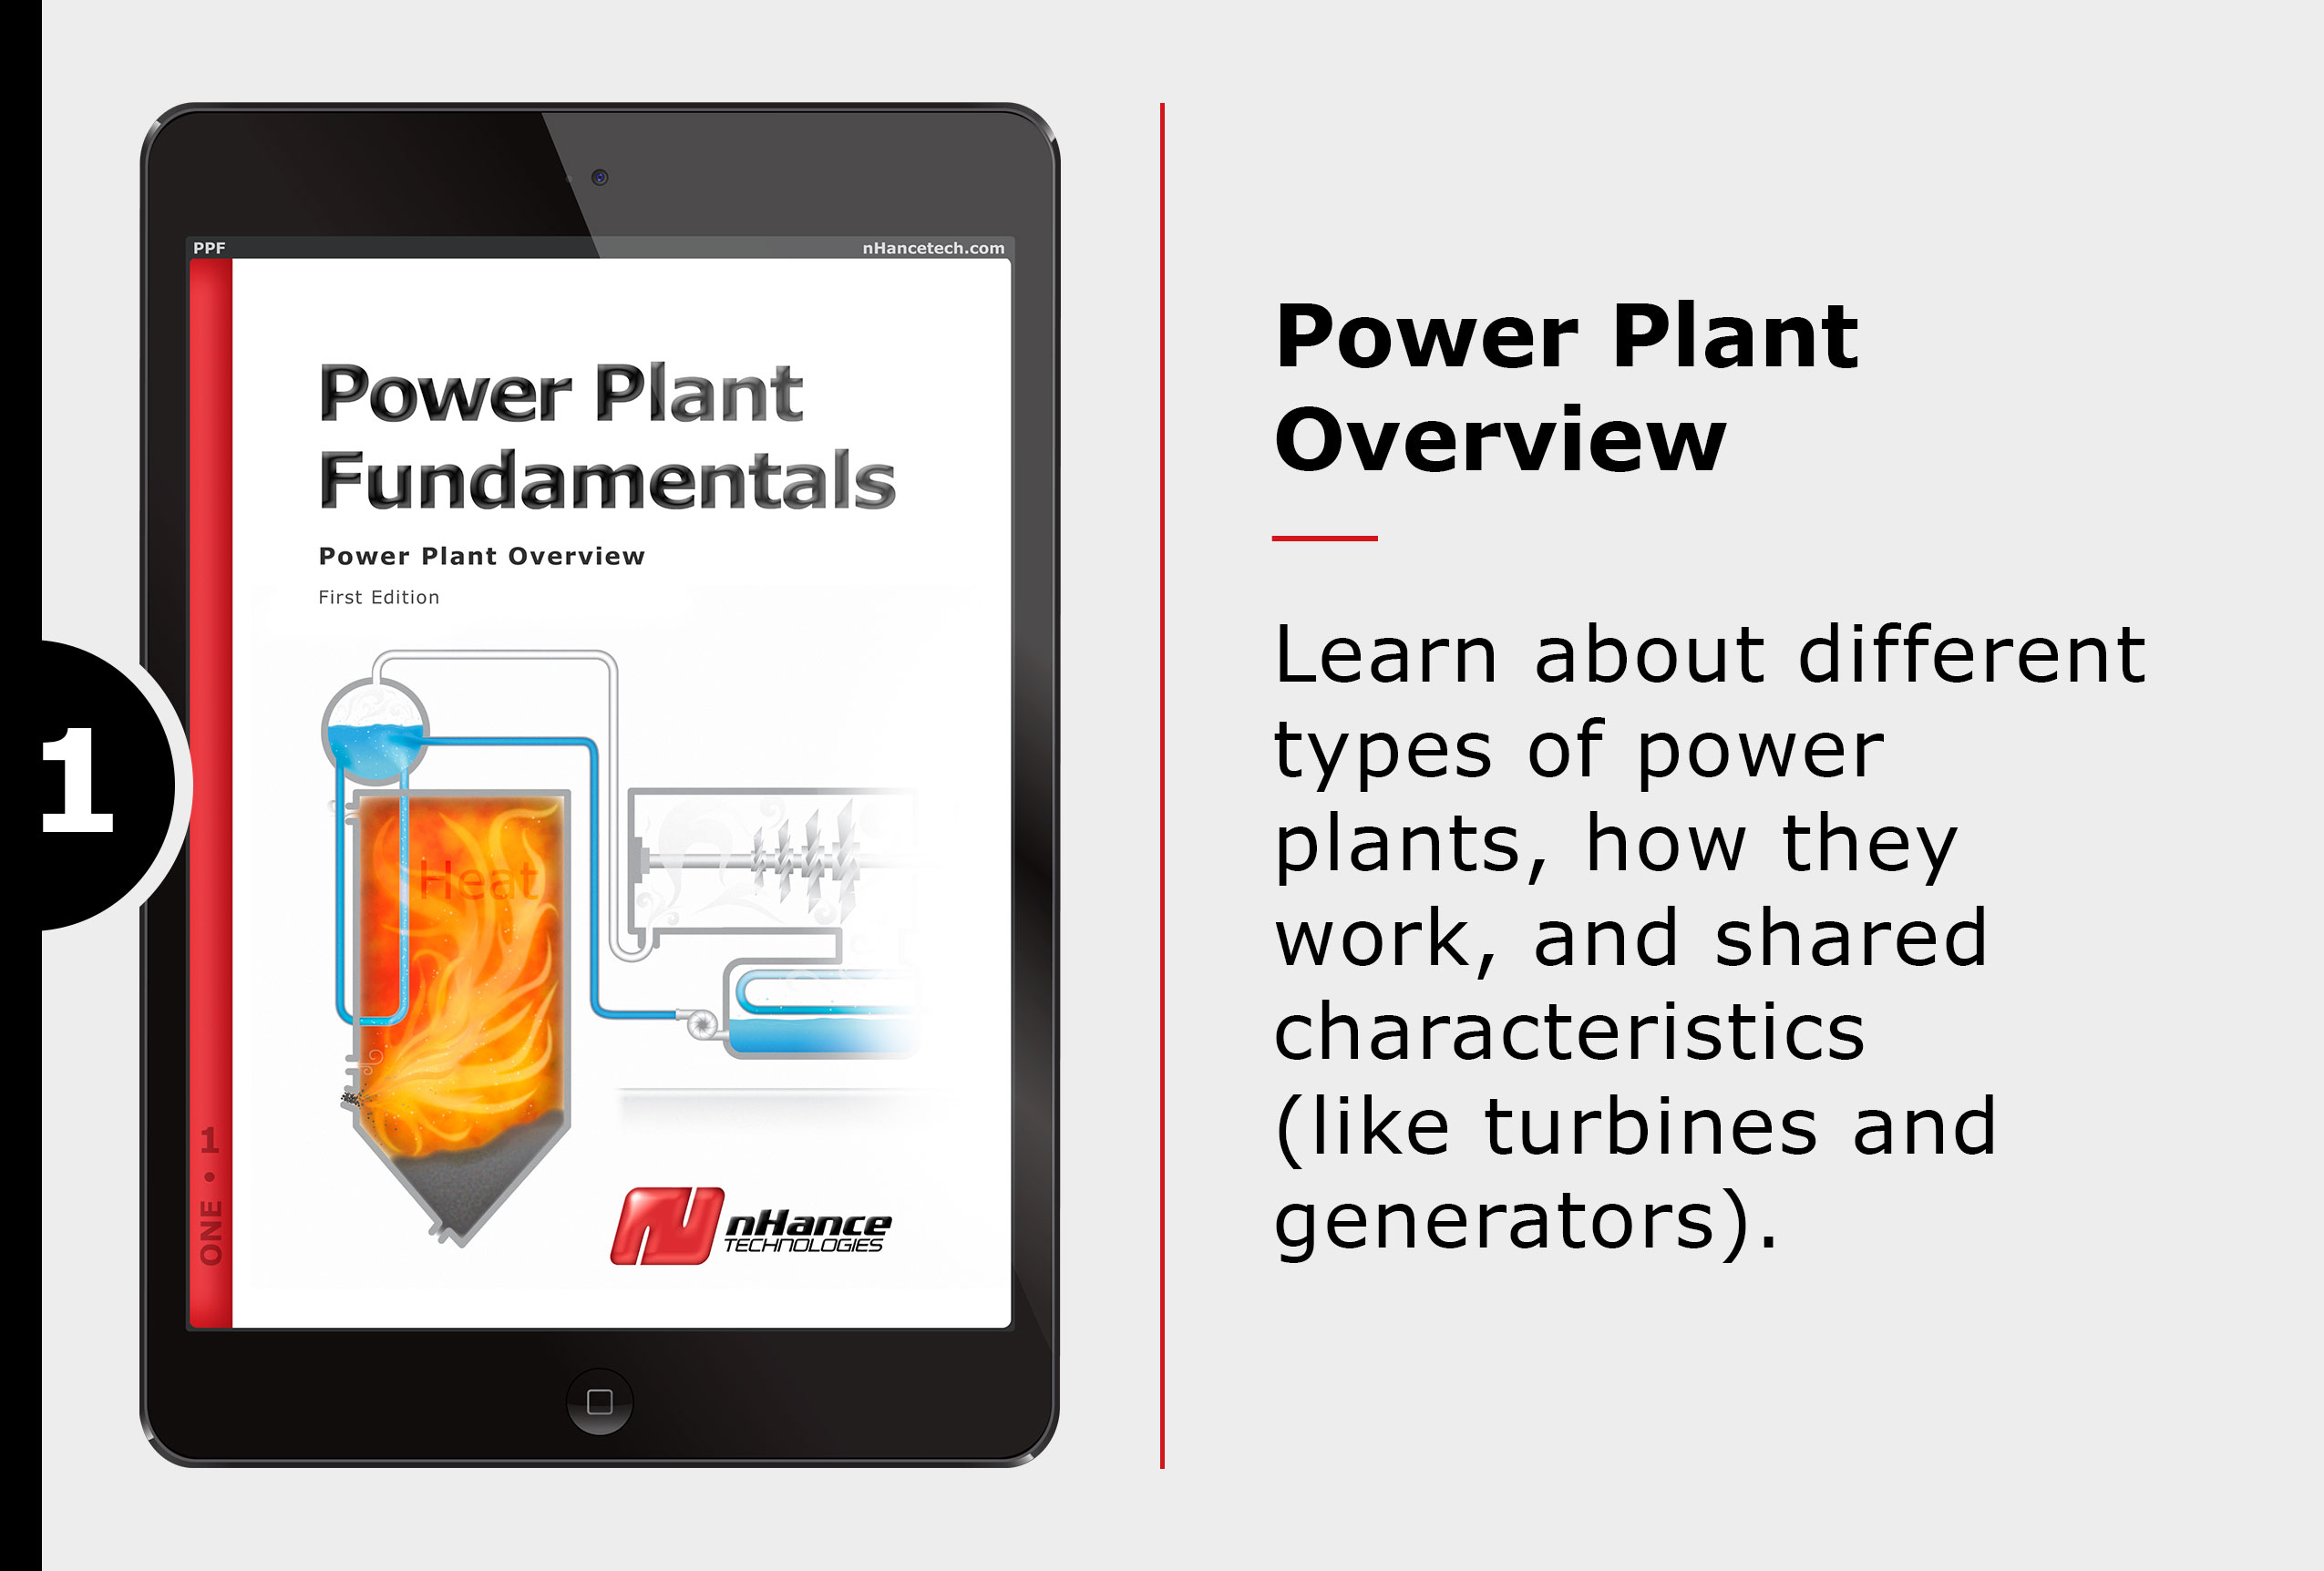 Power Plant Overview — Learn about different types of power plants, how they work, and shared characteristics (like turbines and generators) in this ebook from the Power Plant Fundamentals series.